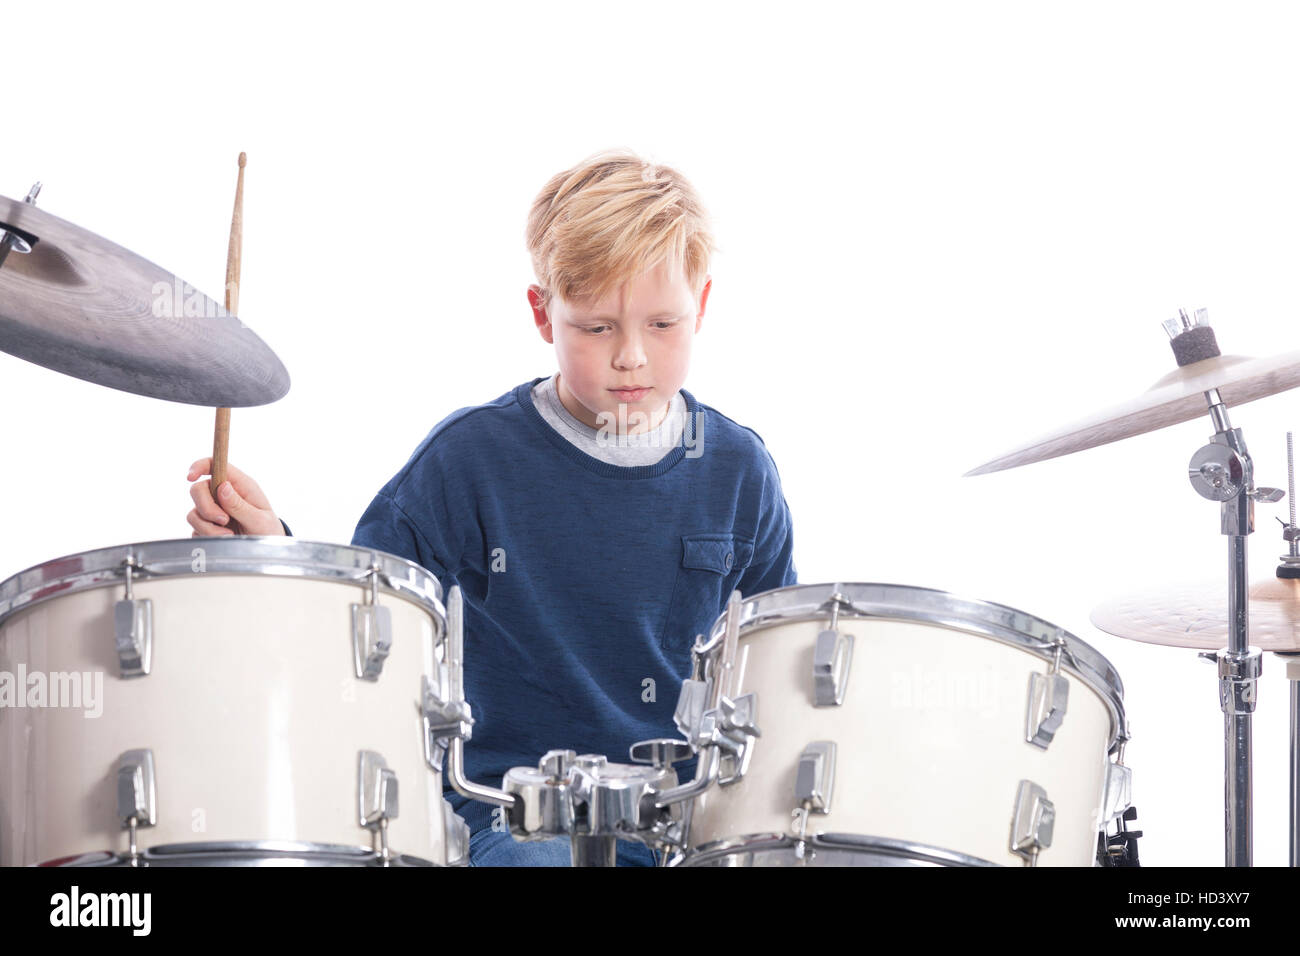 young blond boy drums behind drum kit against white background in studio Stock Photo